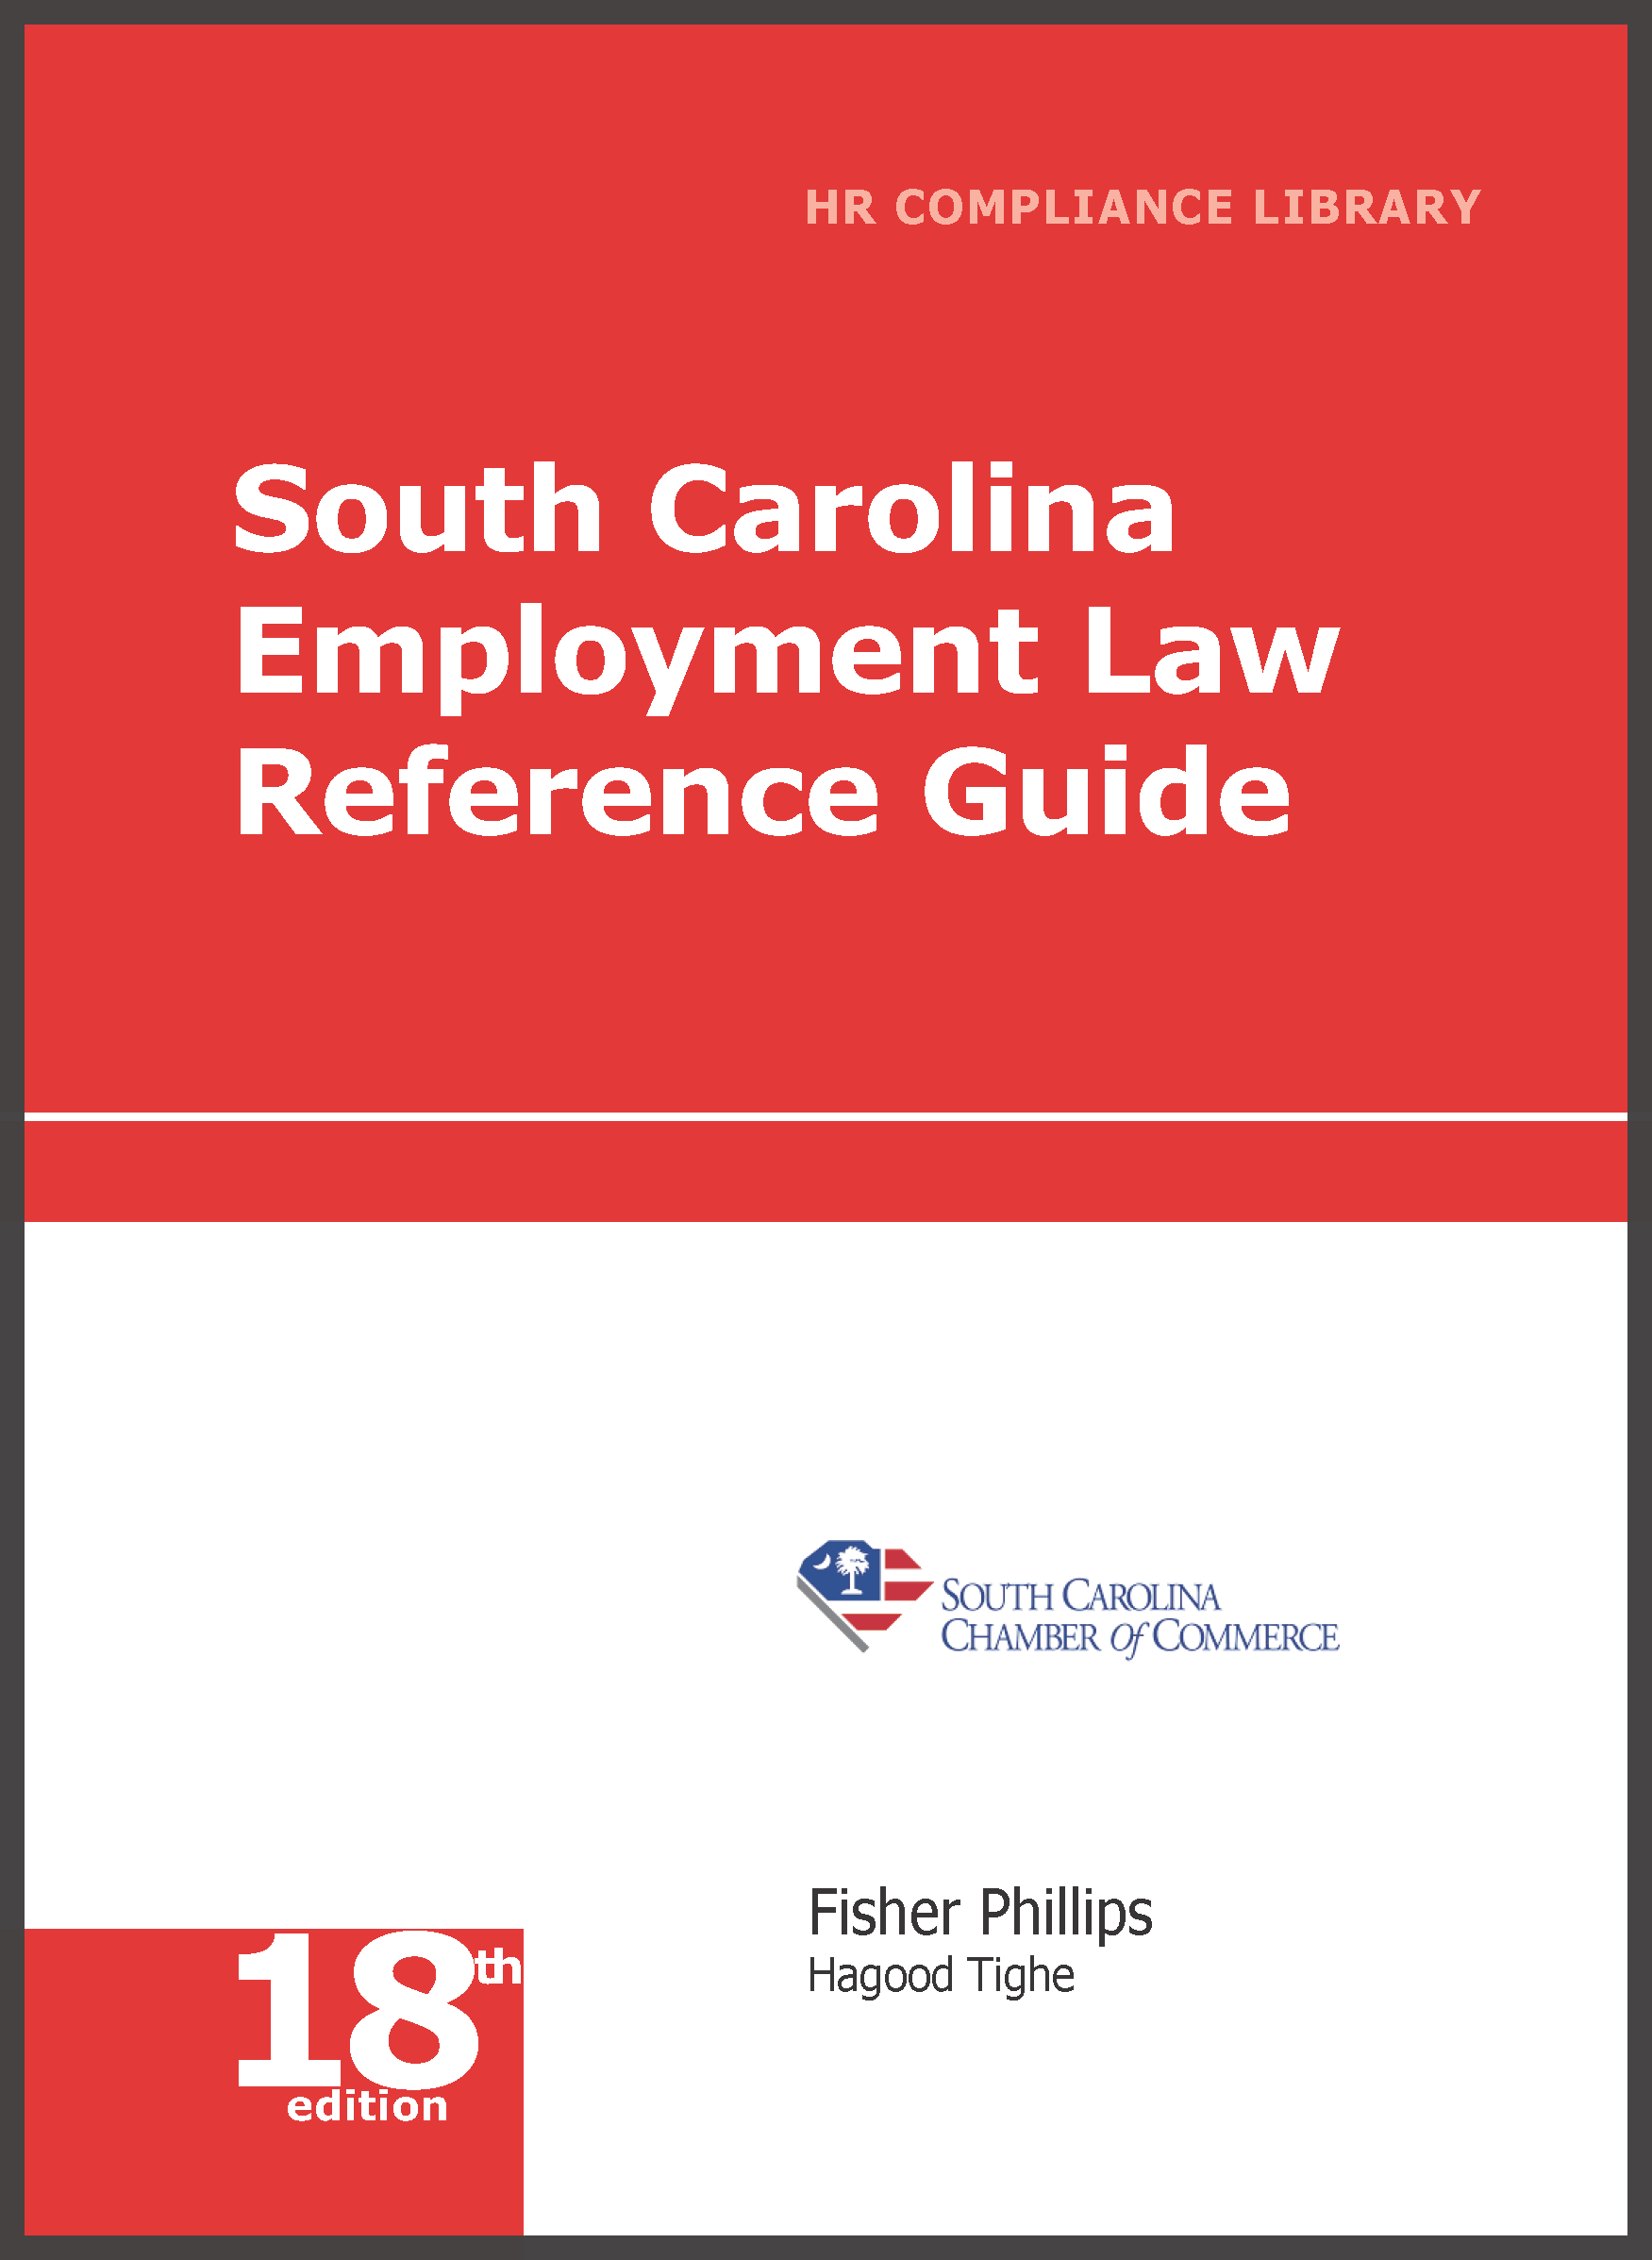 South Carolina 7-Day Free Trial employment law image, remote work, labor laws, employment laws, right to work, order of protection, minimum wage